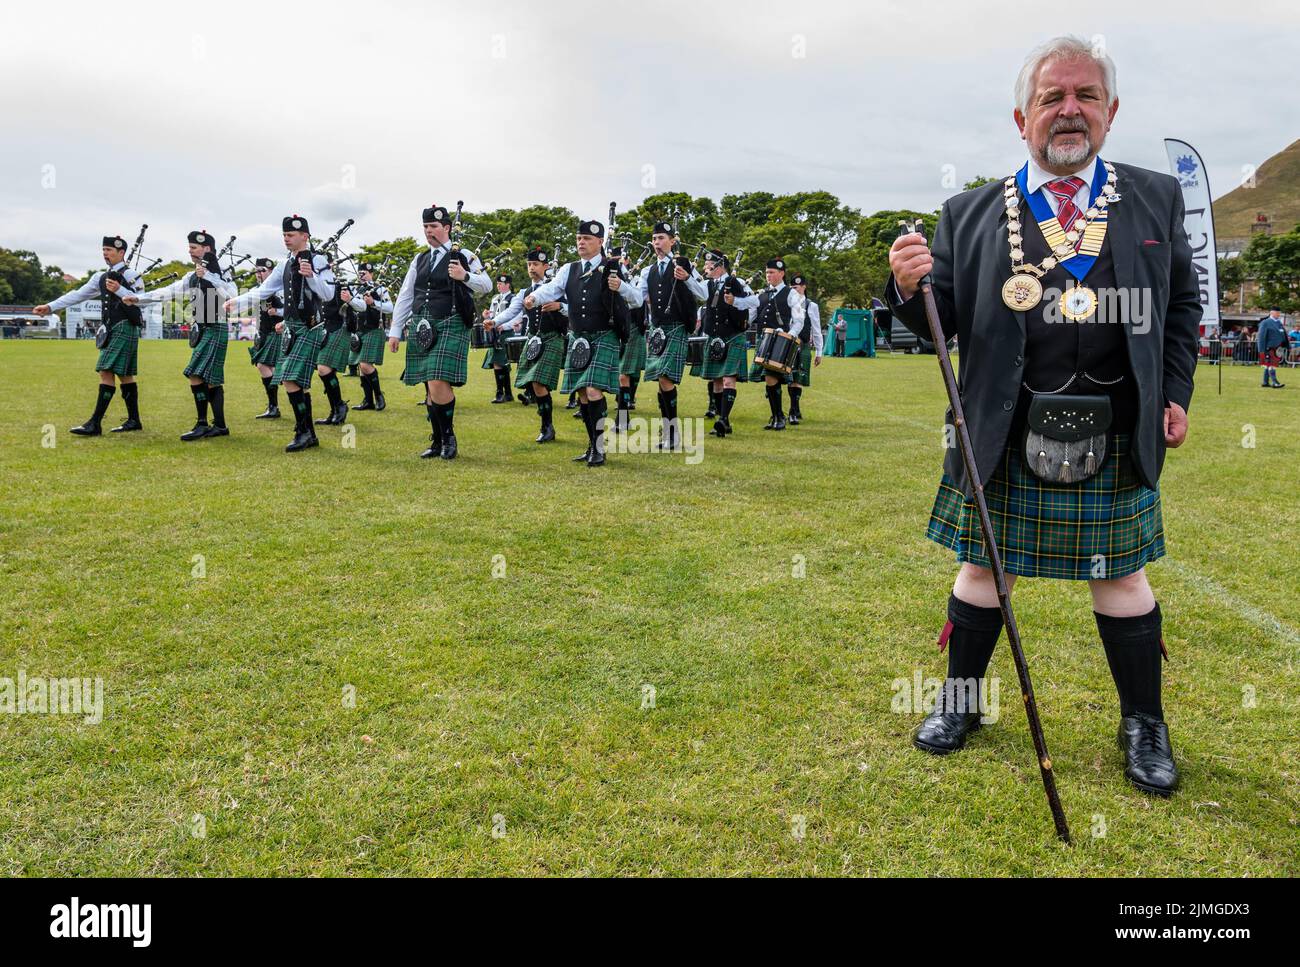 North Berwick, East Lothian, Scotland, United Kingdom, 6th August 2022. North Berwick Highland games: the annual games takes place at the recreation ground in the seaside town. Pictured:The Provost of East Lothian, Councillor John McMillan Credit: Sally Anderson/Alamy Live News Stock Photo